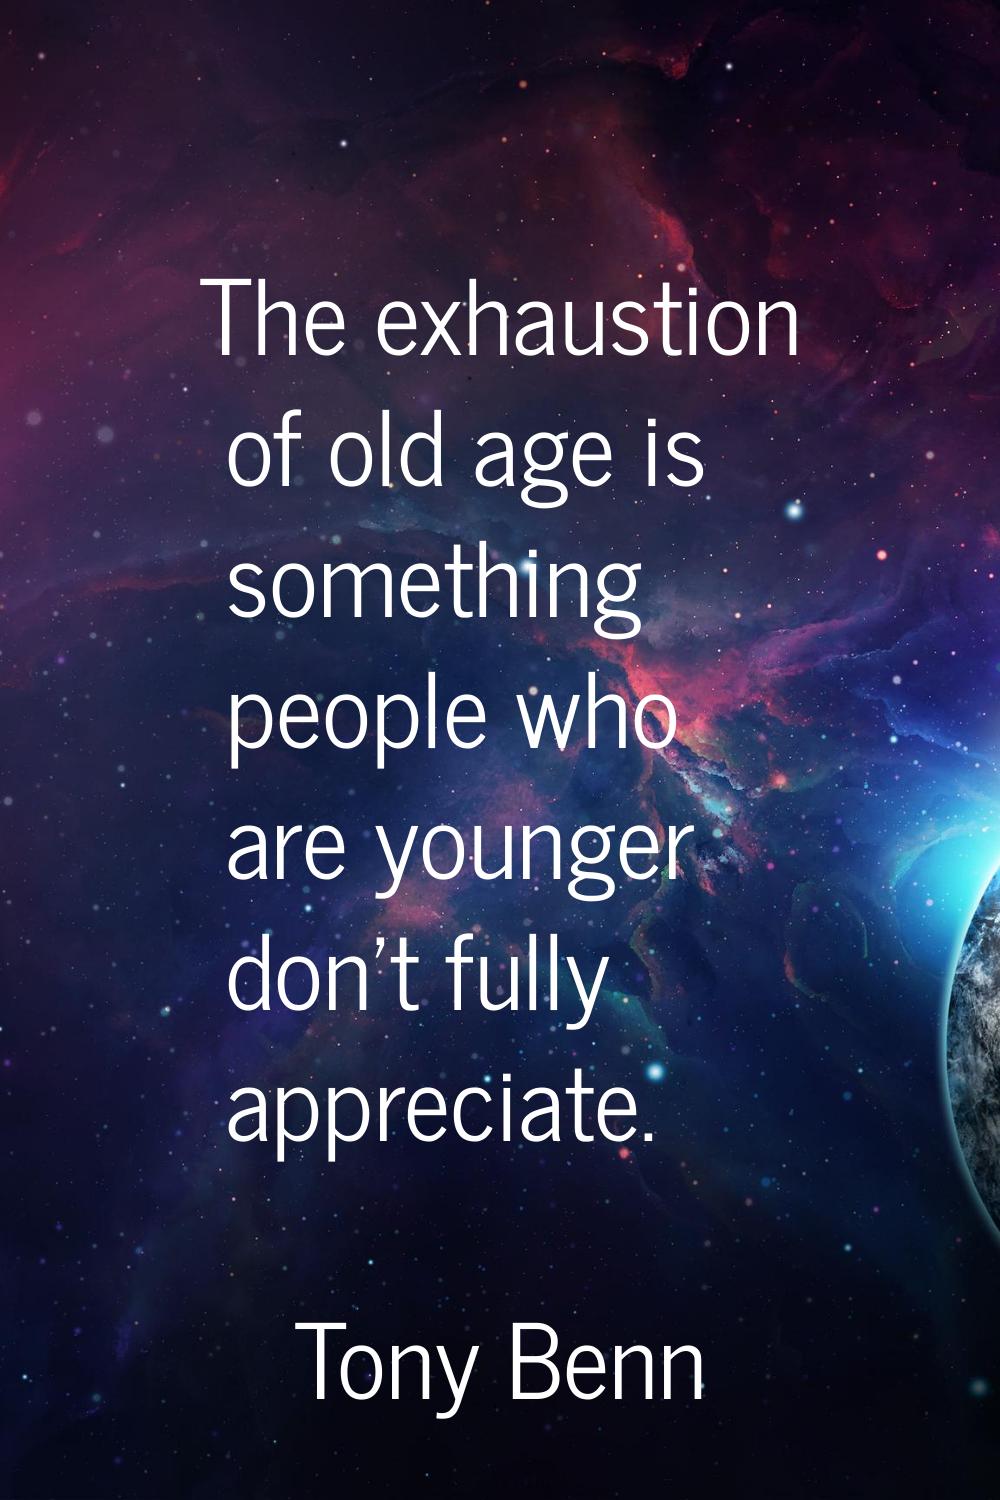 The exhaustion of old age is something people who are younger don't fully appreciate.